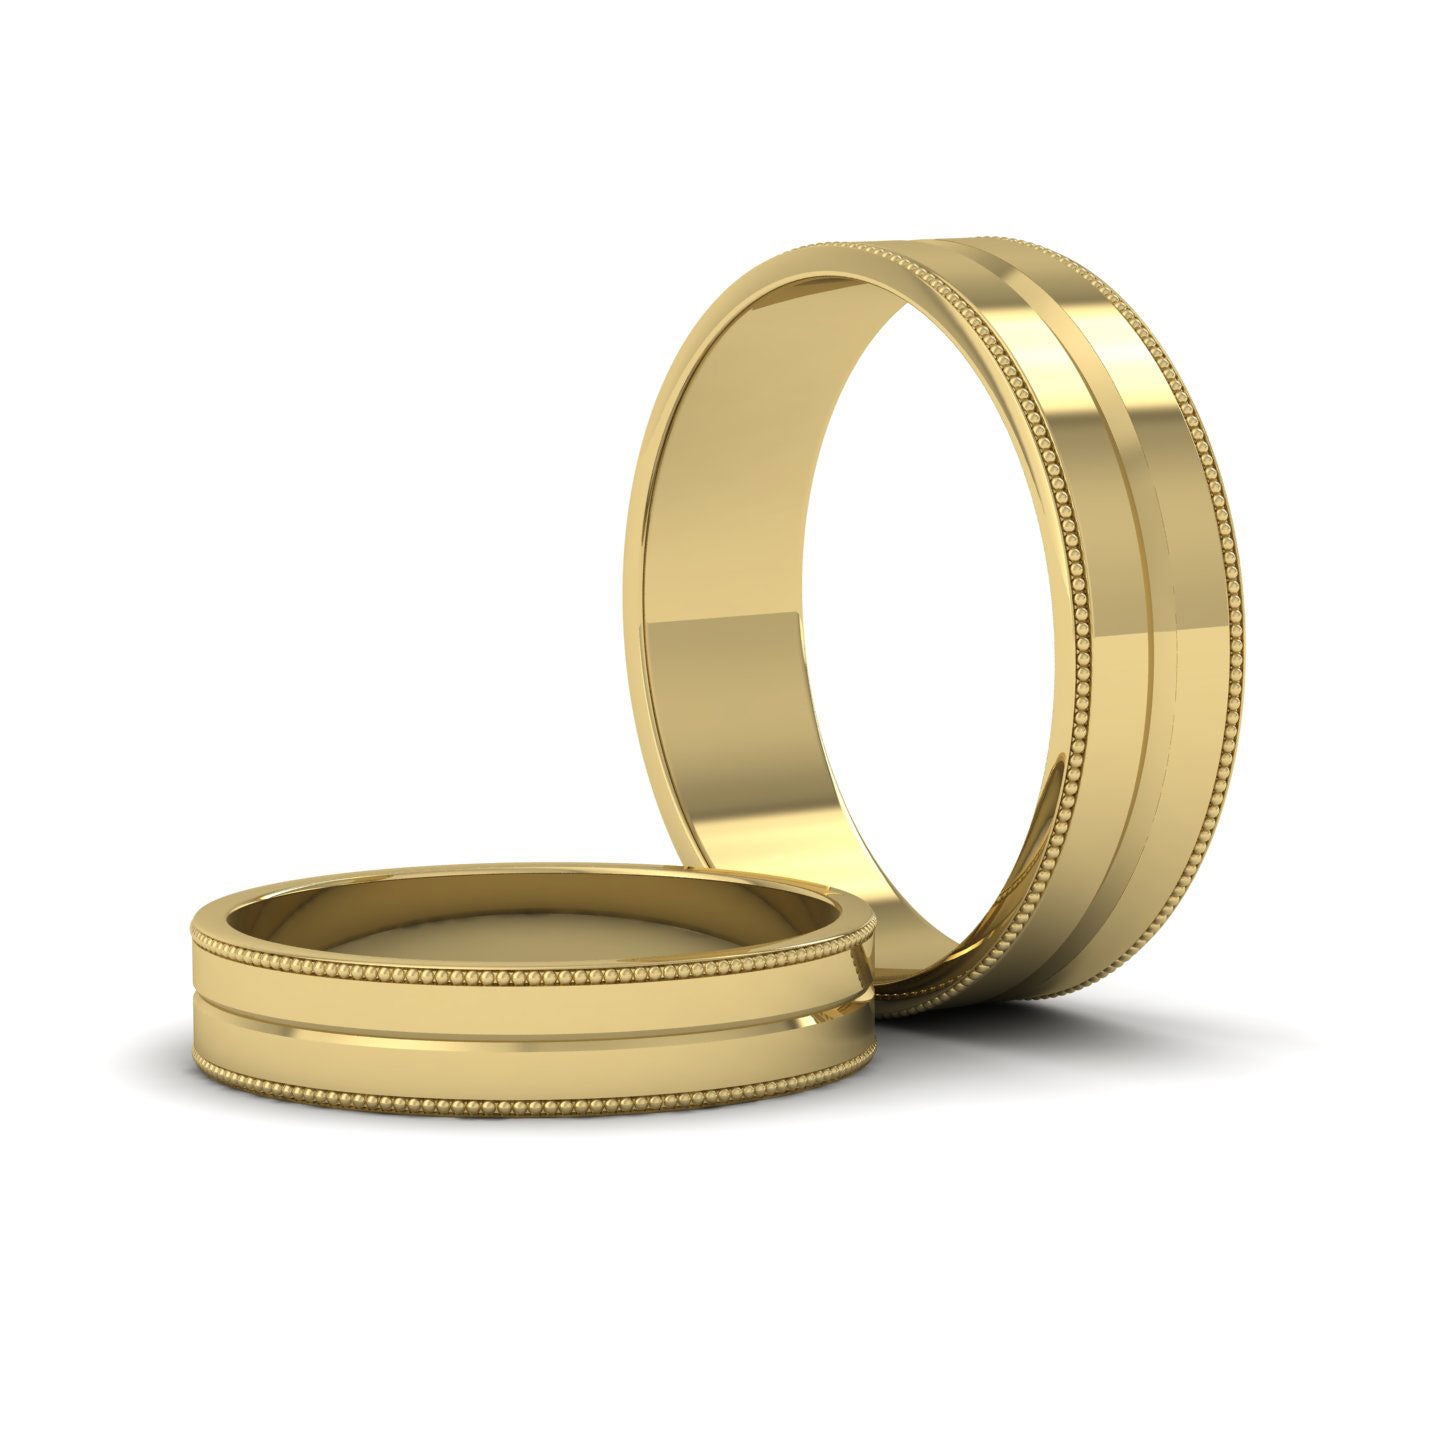 Millgrain And Line Pattern 18ct Yellow Gold 6mm Flat Wedding Ring